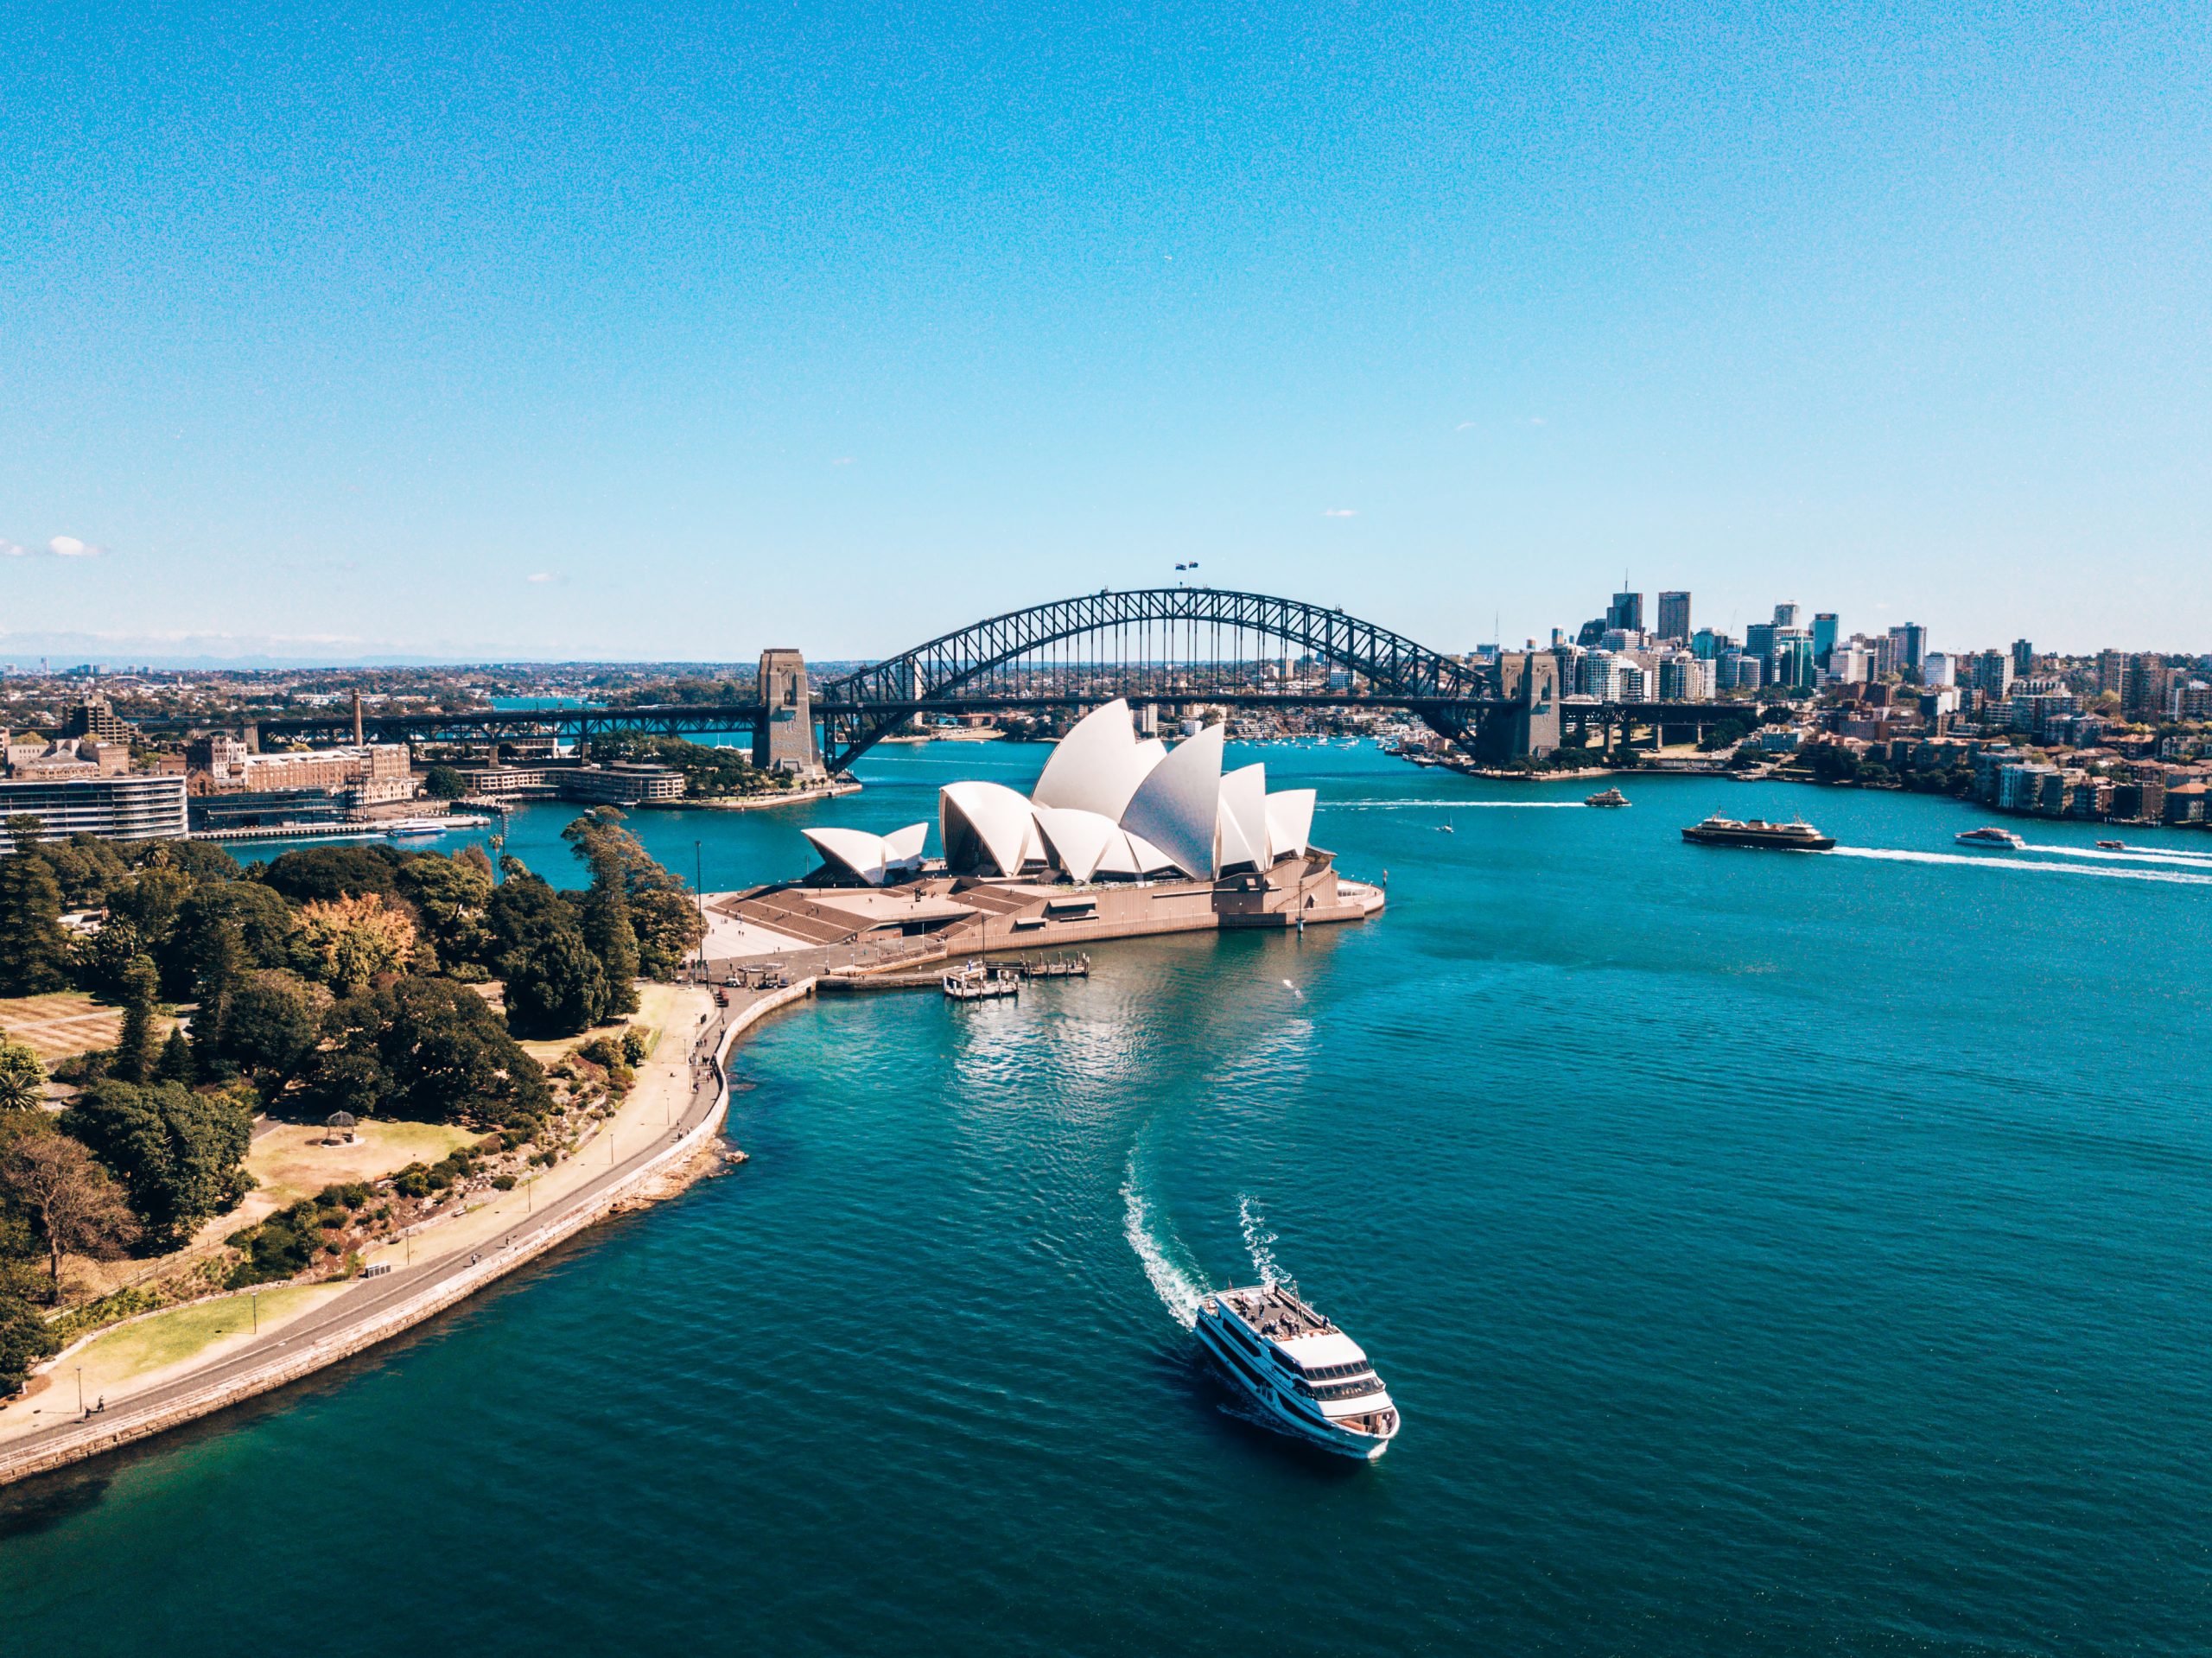 NSW 190 visa changes on the occupation lists and requirements for 2021 and 2022